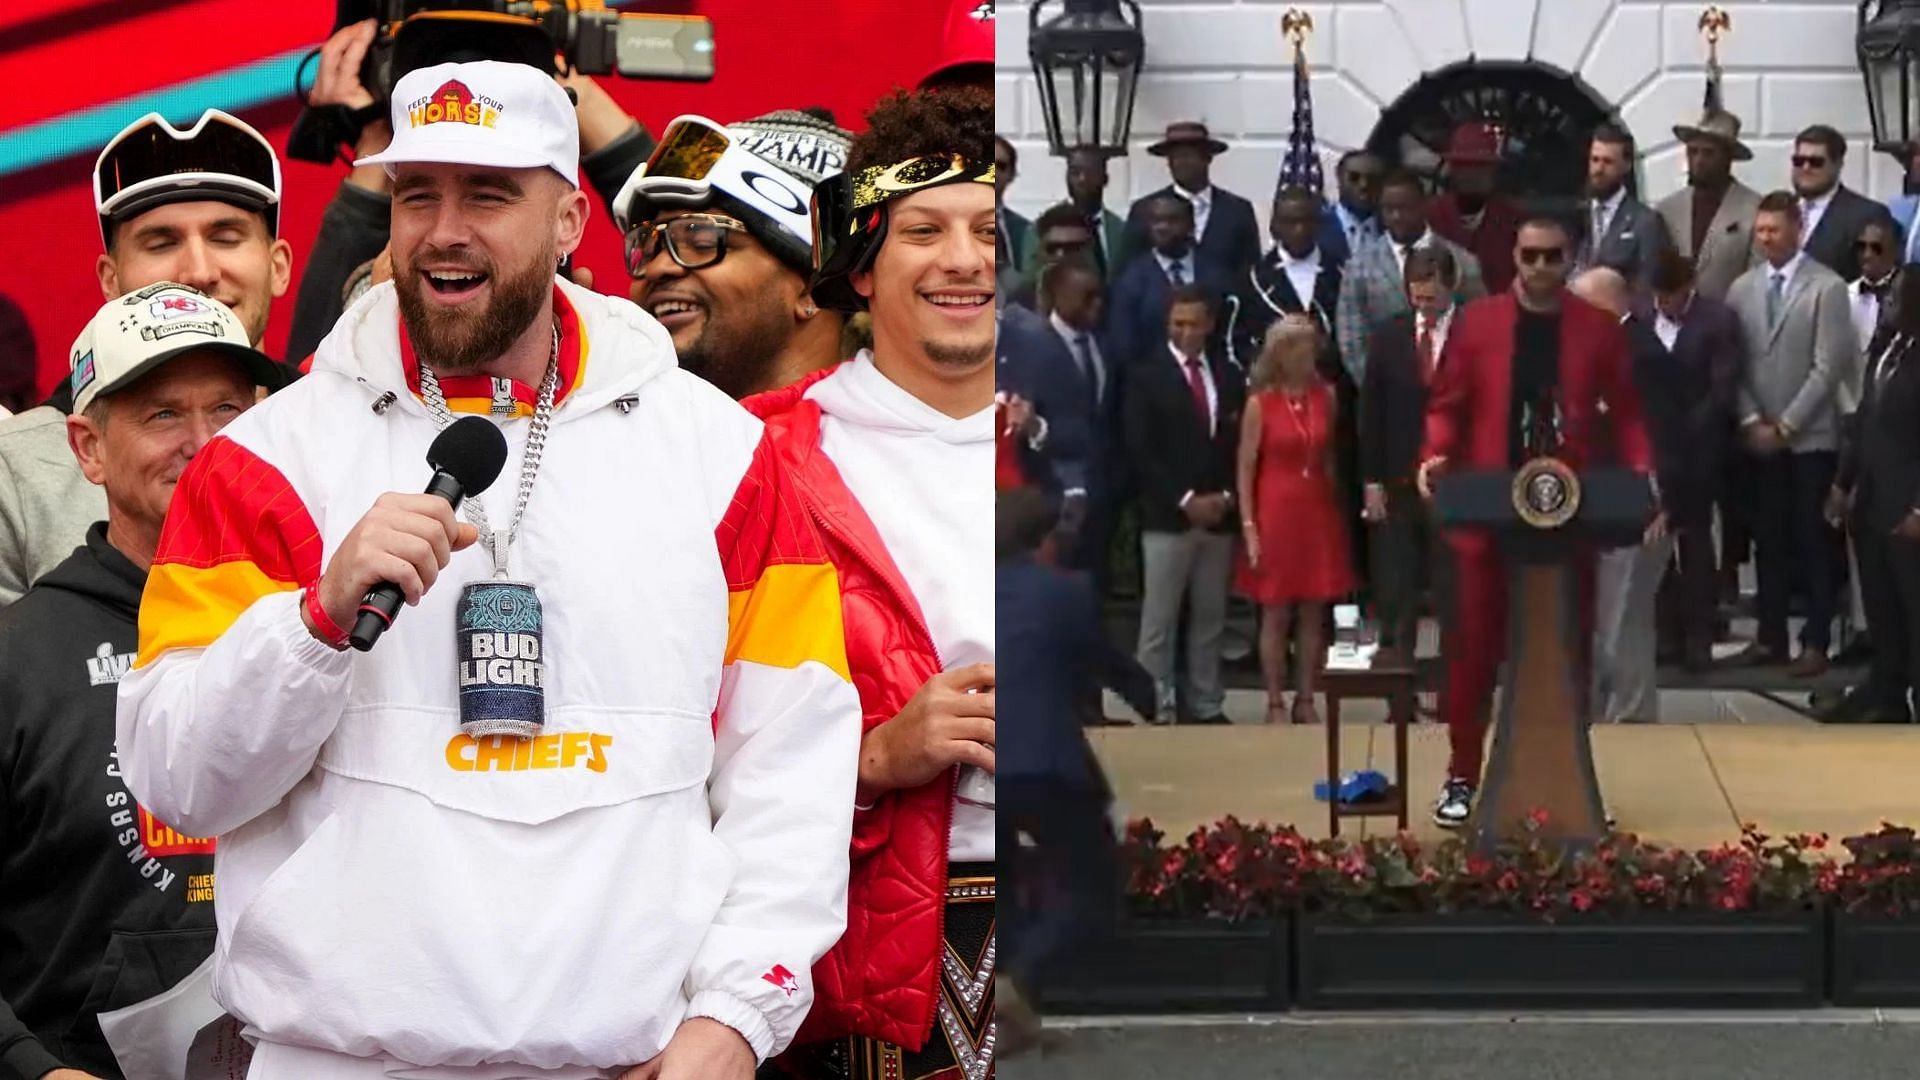 Kelce has revealed what he was going to say at the White House.